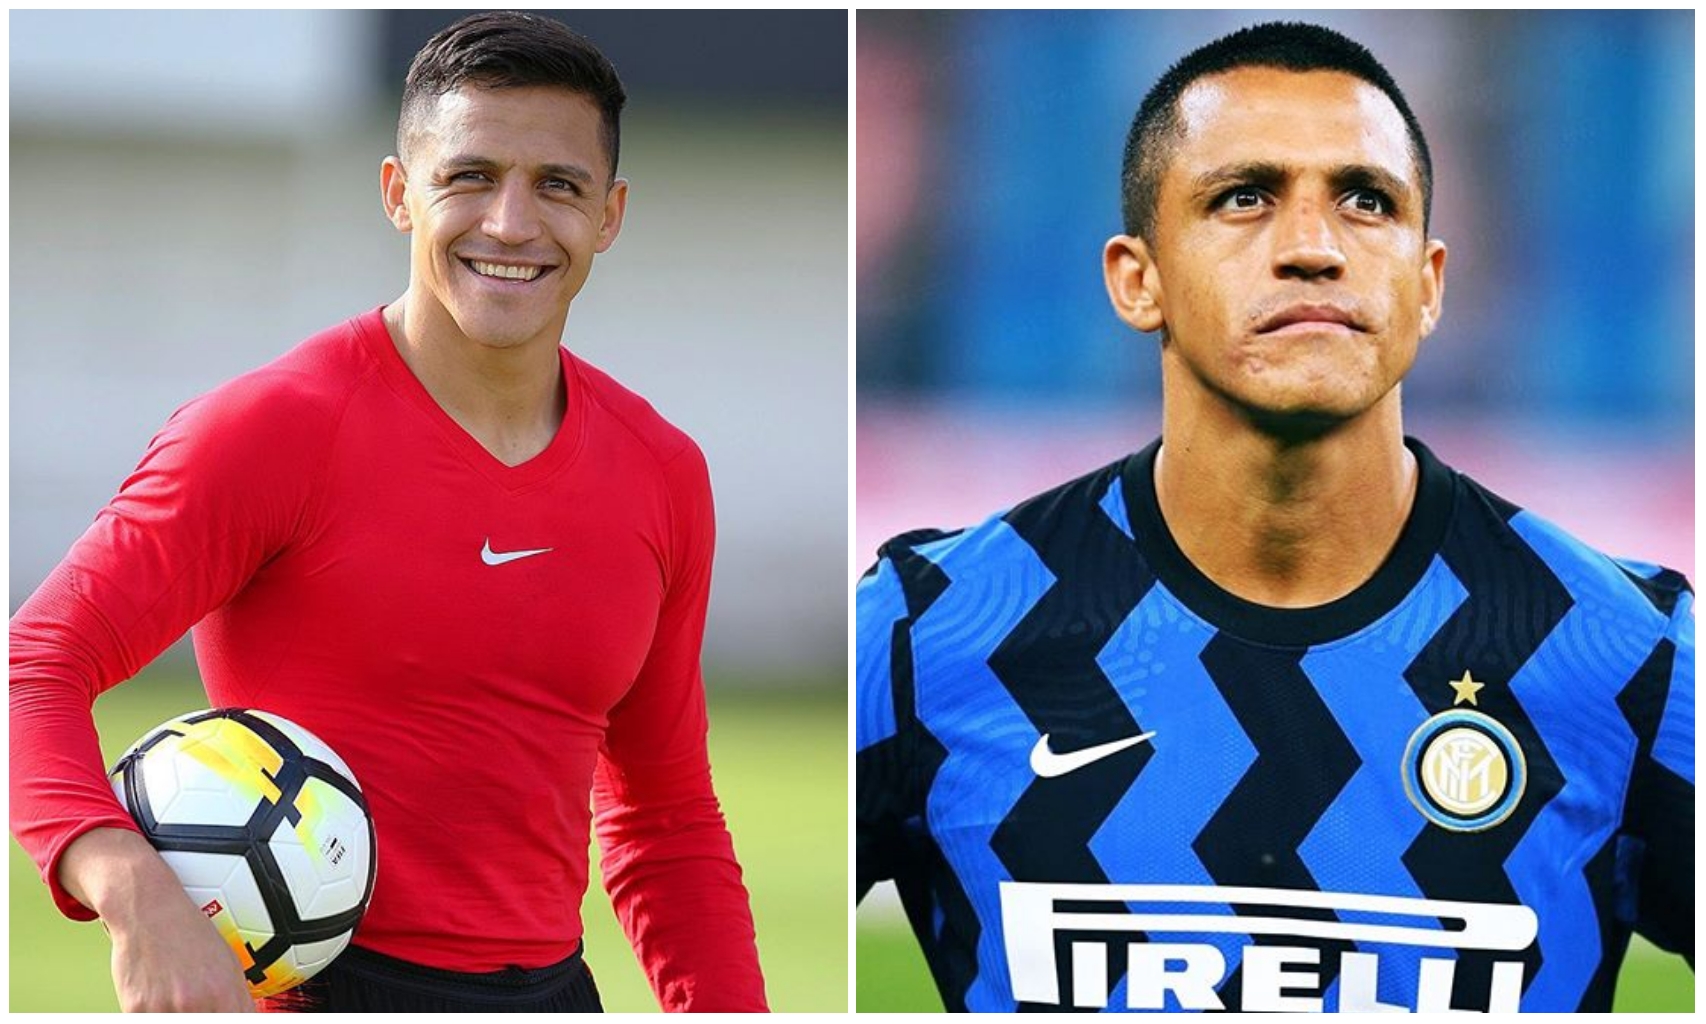 BREAKING: Inter Milan signs Alexis Sanchez from Manchester United